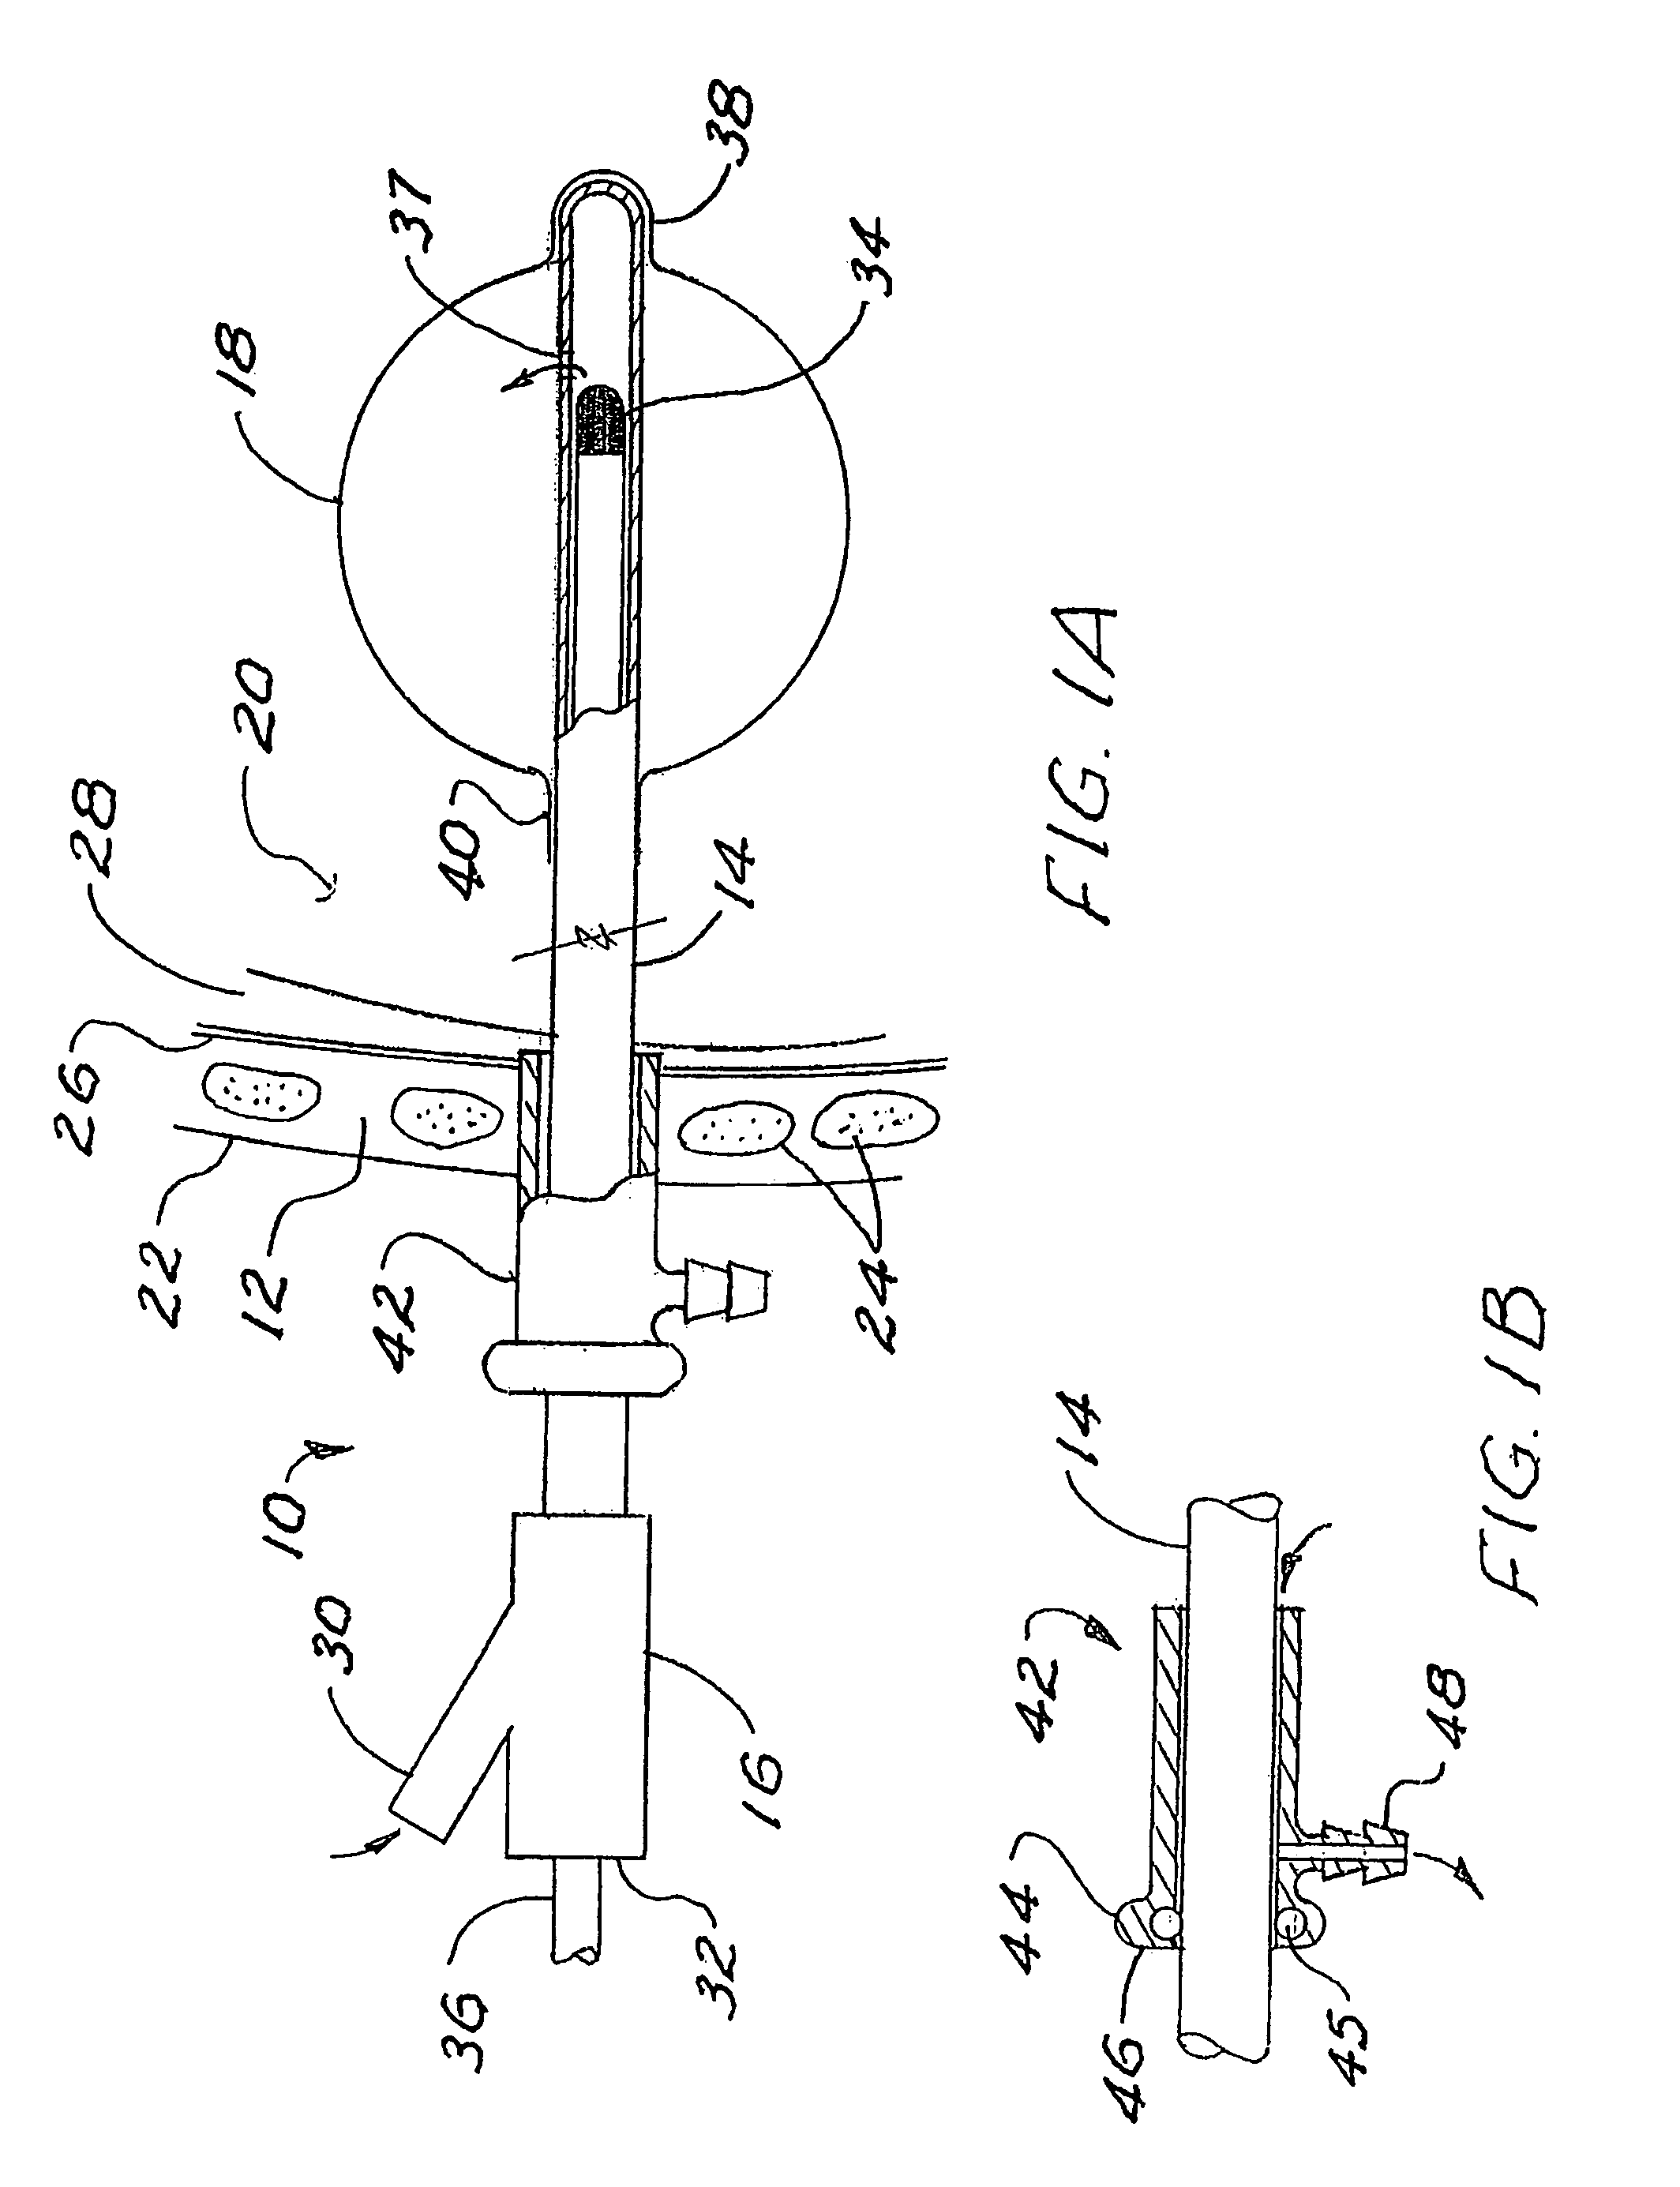 Brachytherapy apparatus and method for use with minimally invasive surgeries of the lung